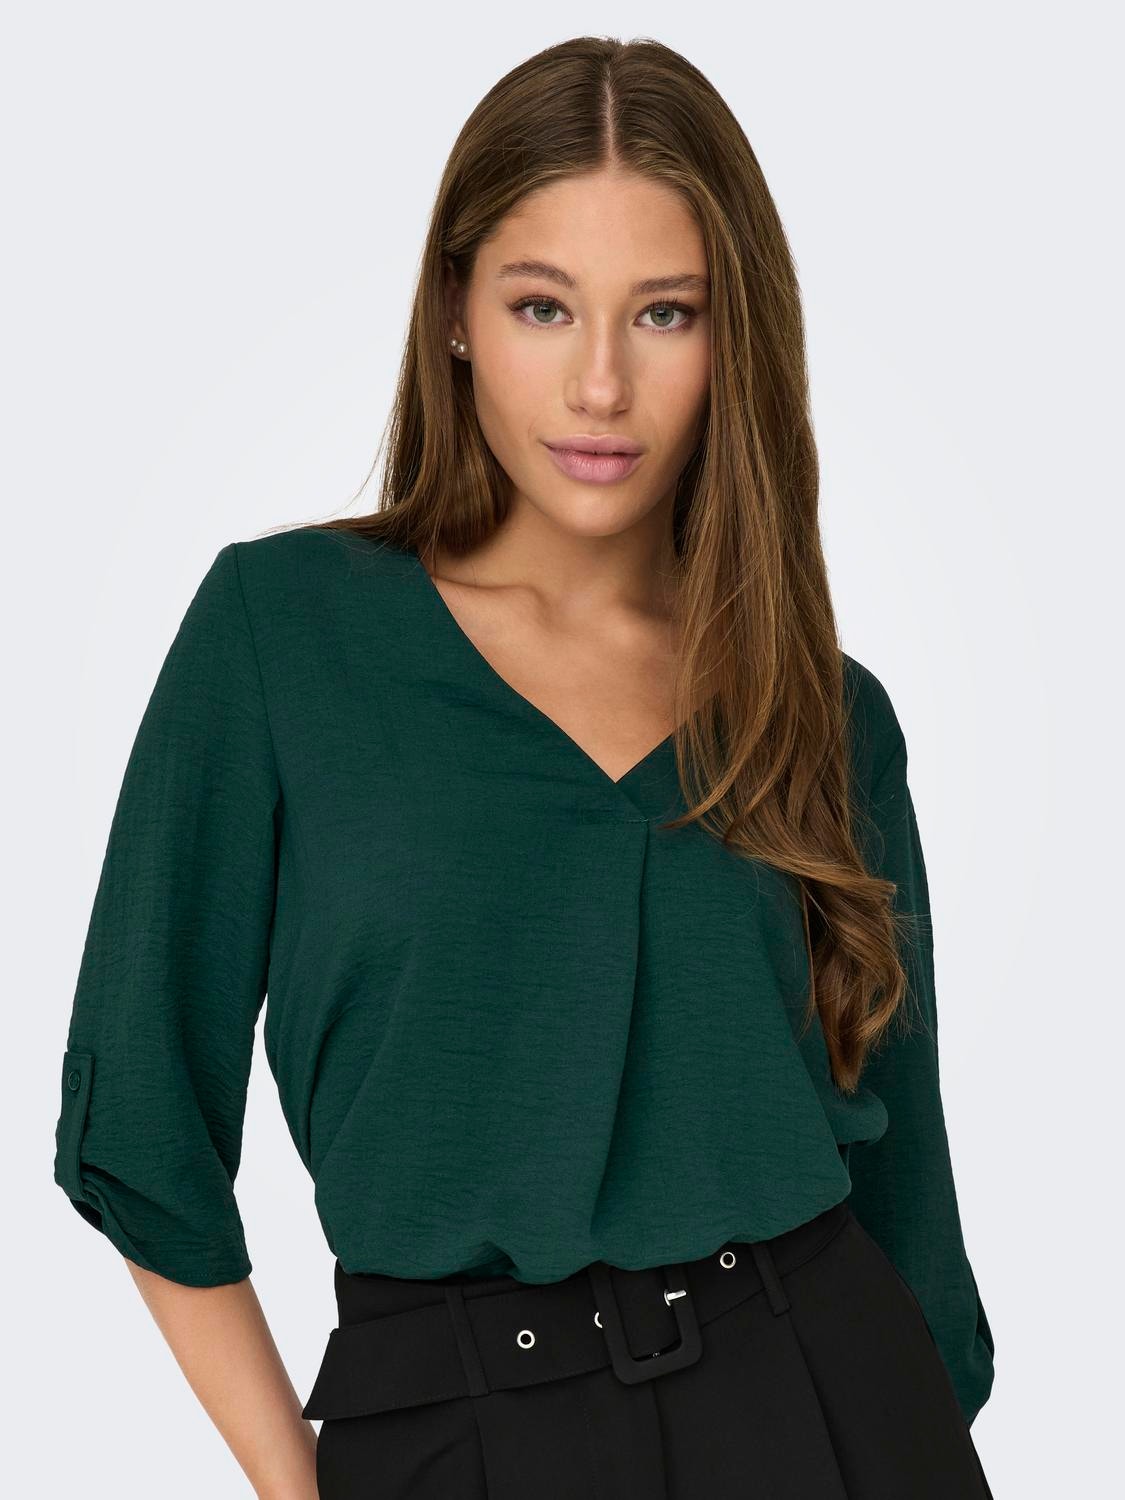 ONLY Loose Fit V-Neck Fold-up cuffs Volume sleeves Top -Ponderosa Pine - 15226911